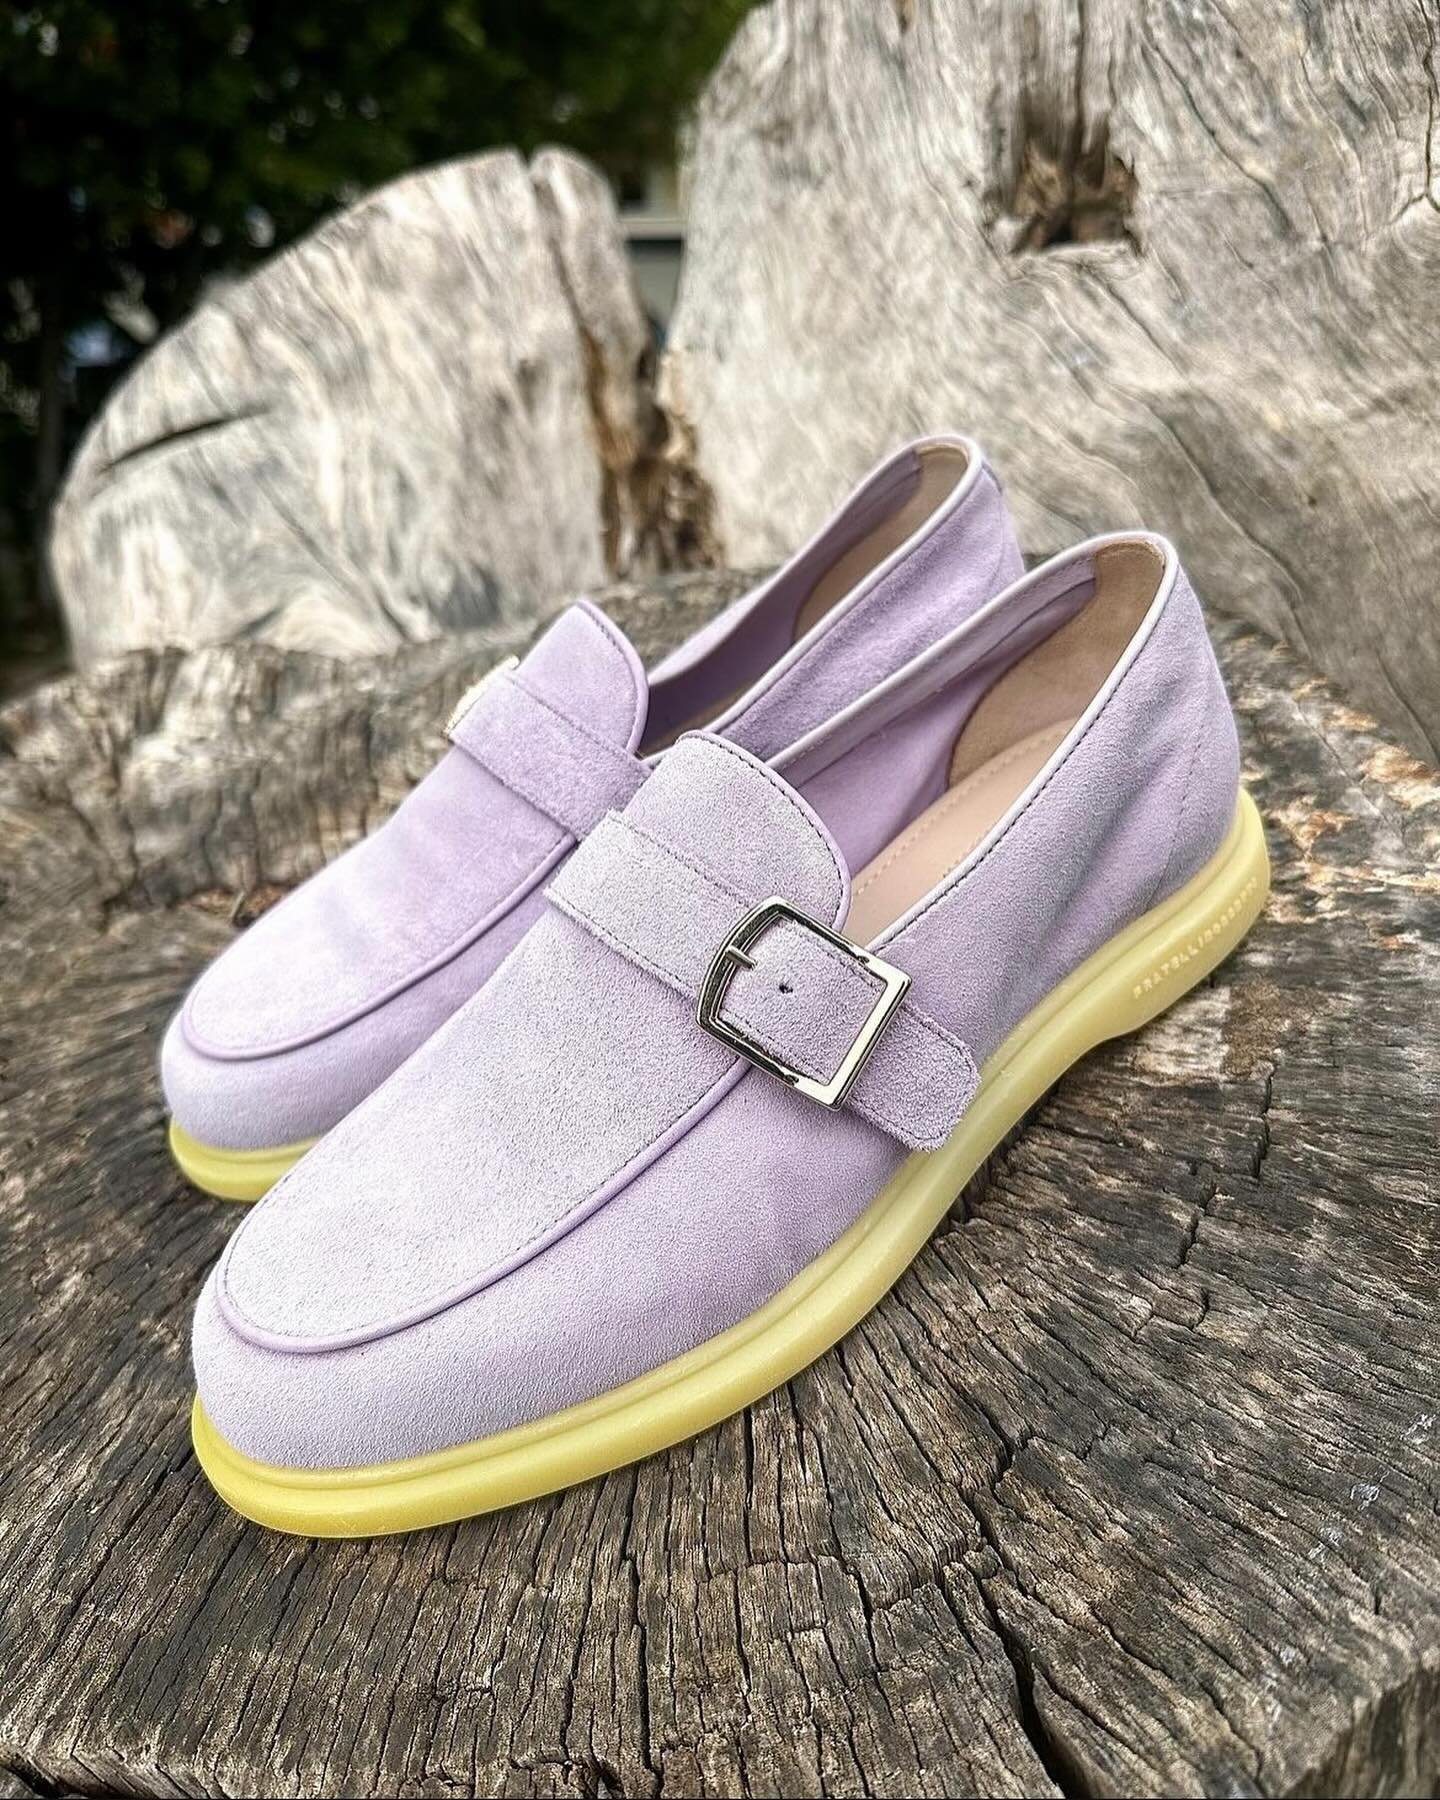 💜 Approach the warmer days with sophistication, with Fratelli Rossetti: a symbol of history, a timeless design that has evolved and fascinated us over the years.

Found them in out stores

📍Podgorica, Njego&scaron;eva 14
📍Budva, TQ Plaza